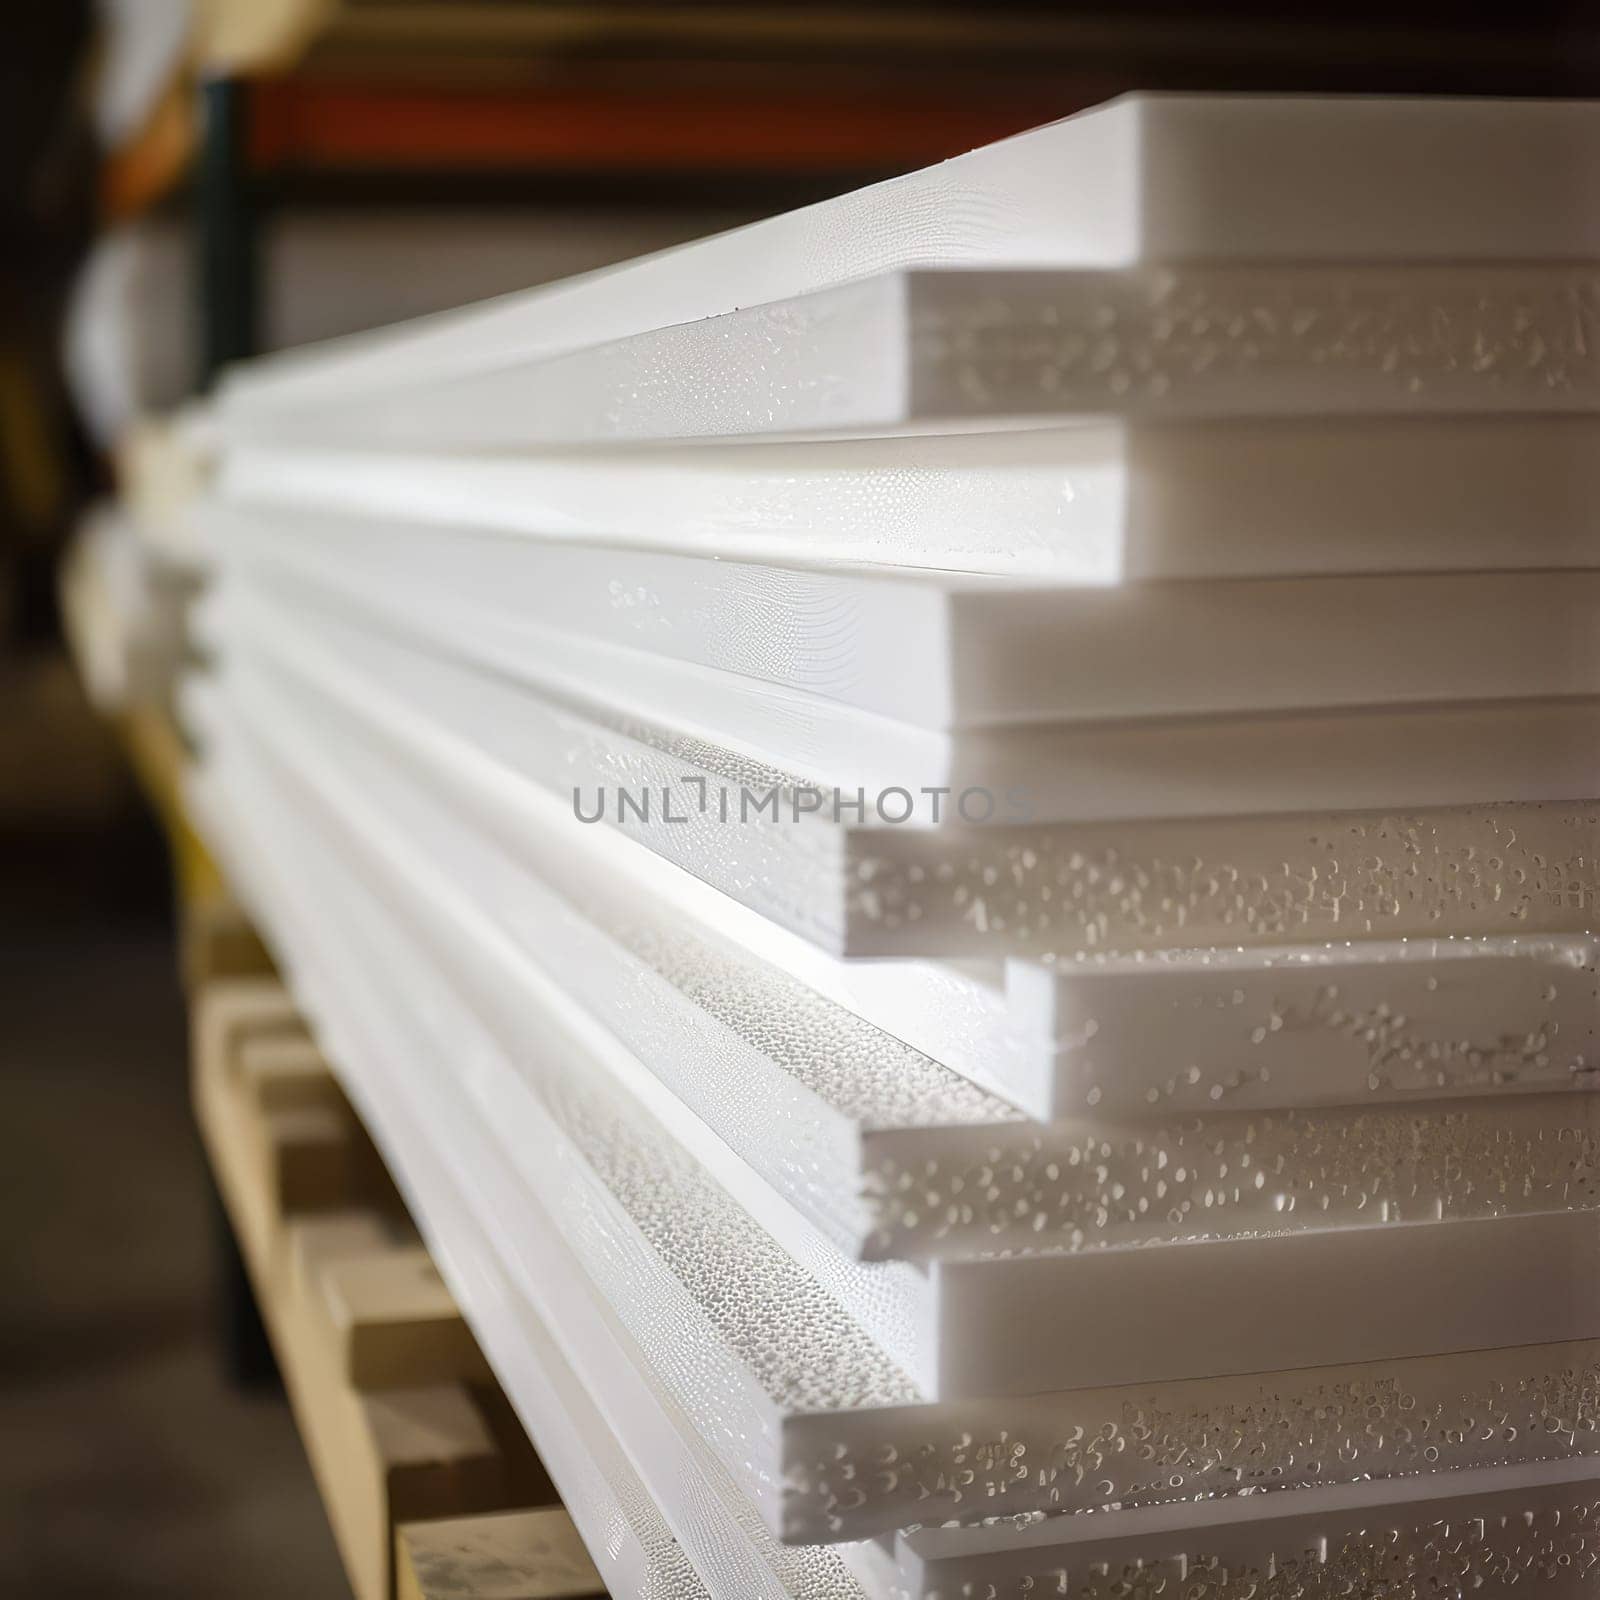 Styrofoam Board Detail: Versatile Material for Packing and Insulation Projects. Expanded polystyrene plates. A stack of building materials for house insulation